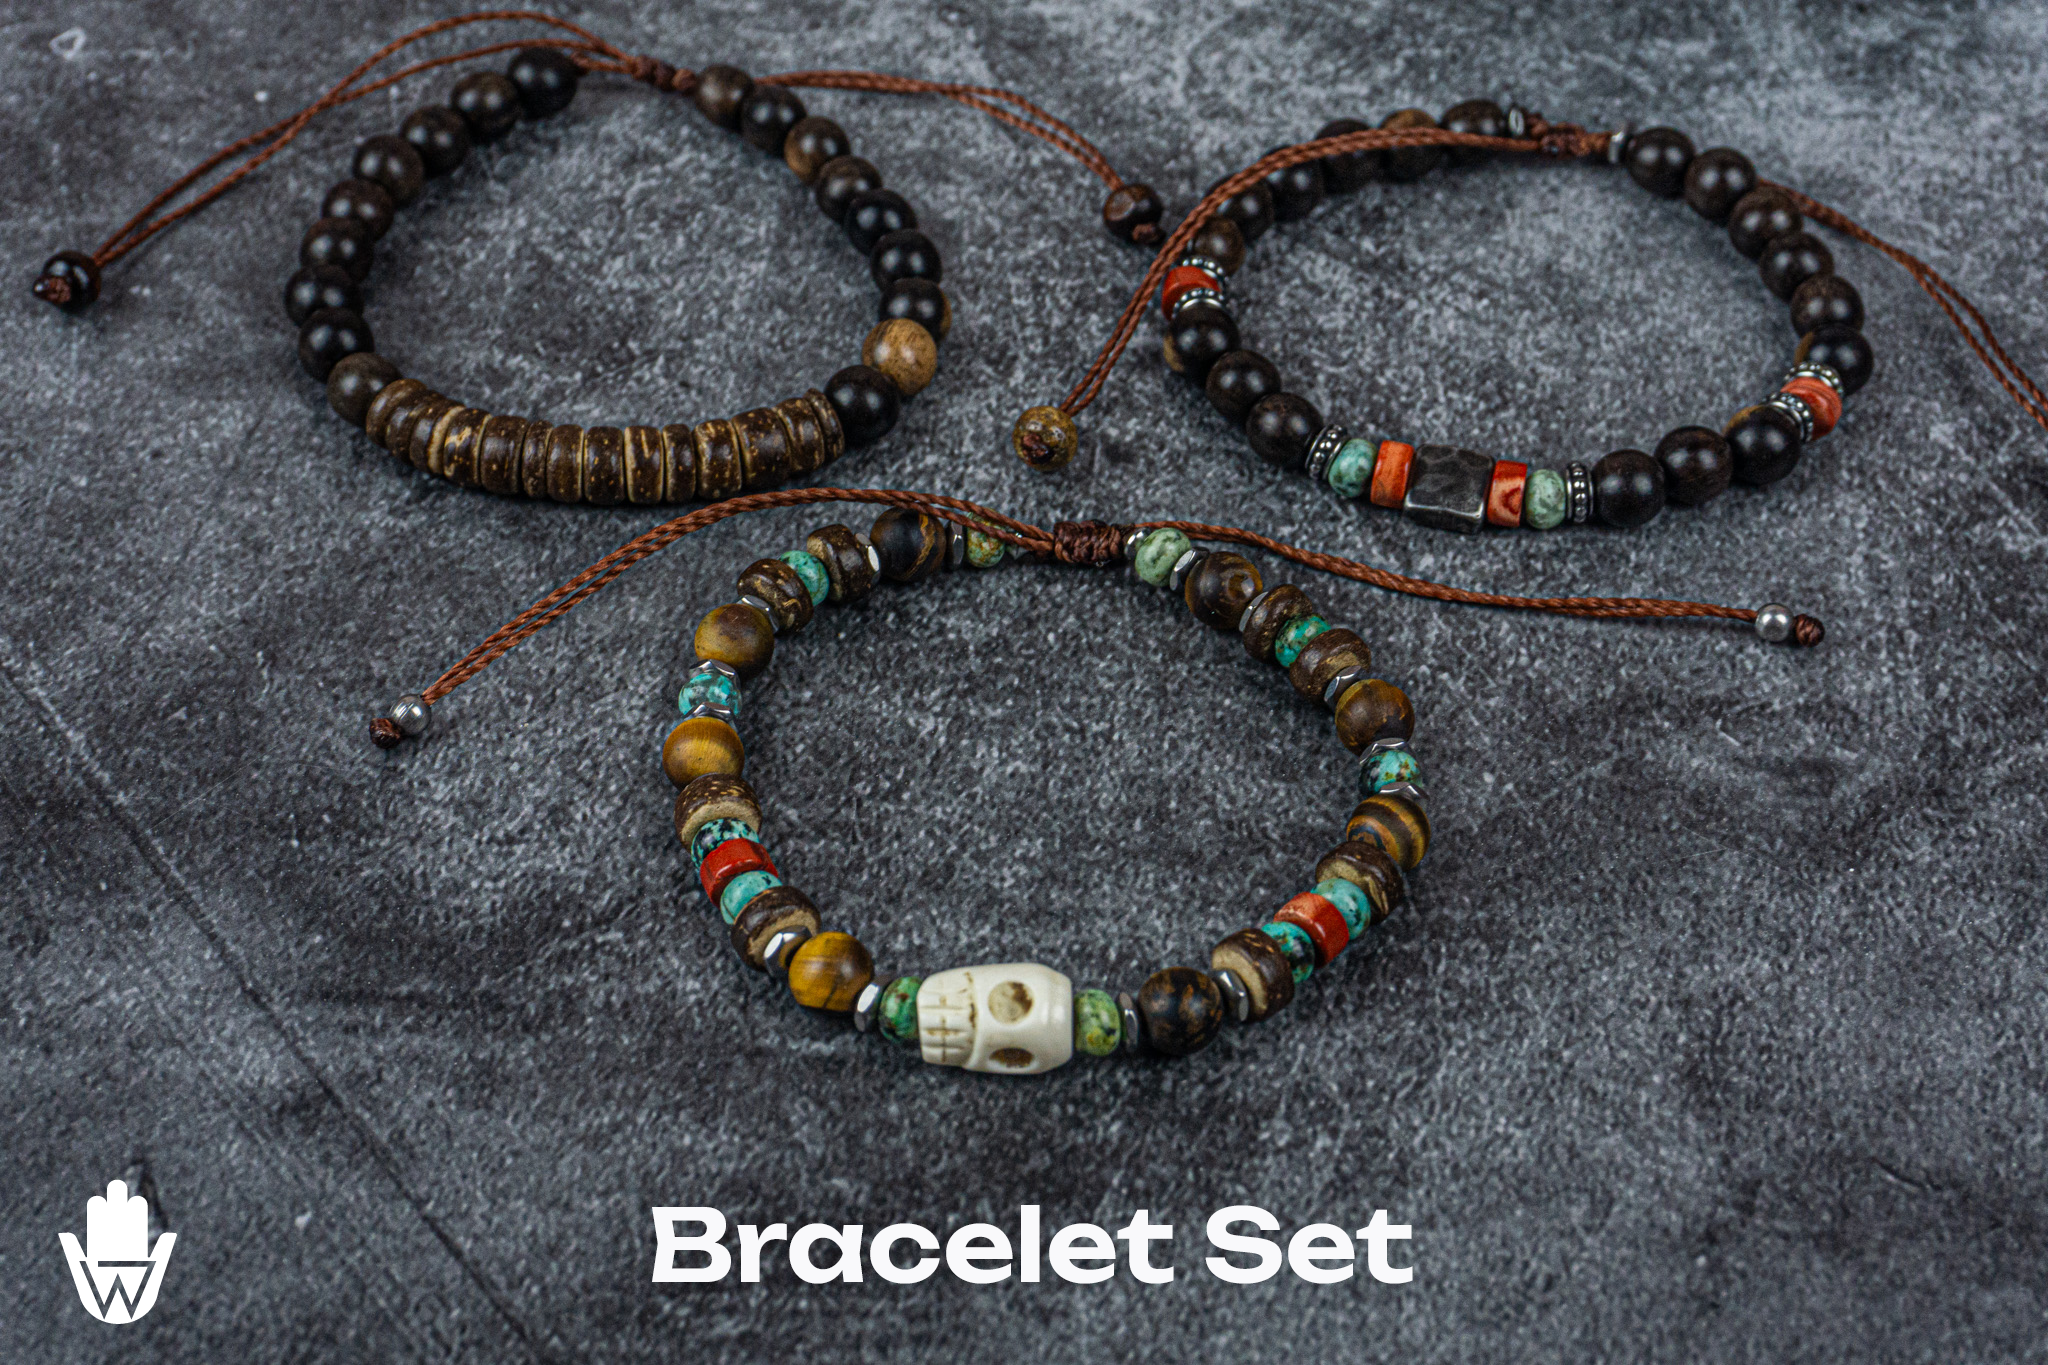 bracelet set of 3 made of ebony wood, coconut, gemstones, with a skull charm as central piece- wander jewellery